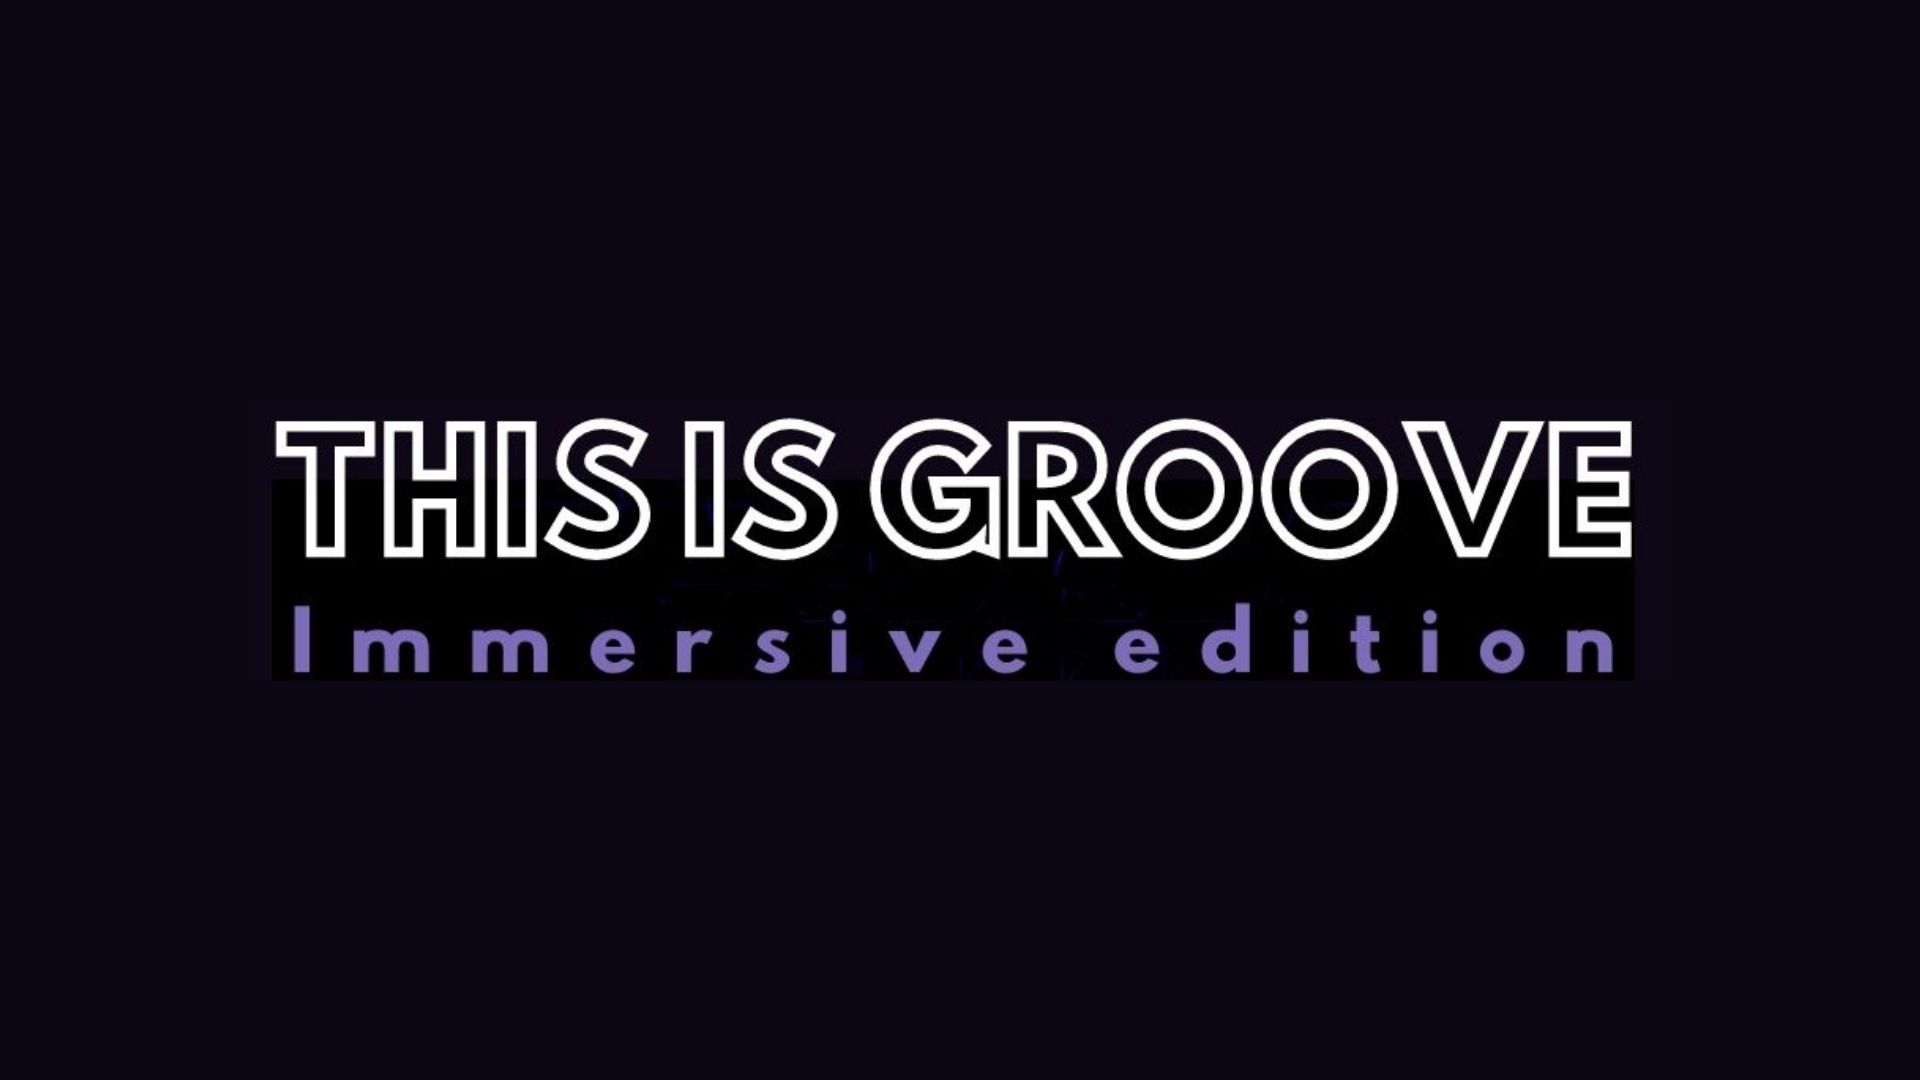 THIS IS GROOVE - Immersive edition - EventiFVG.it